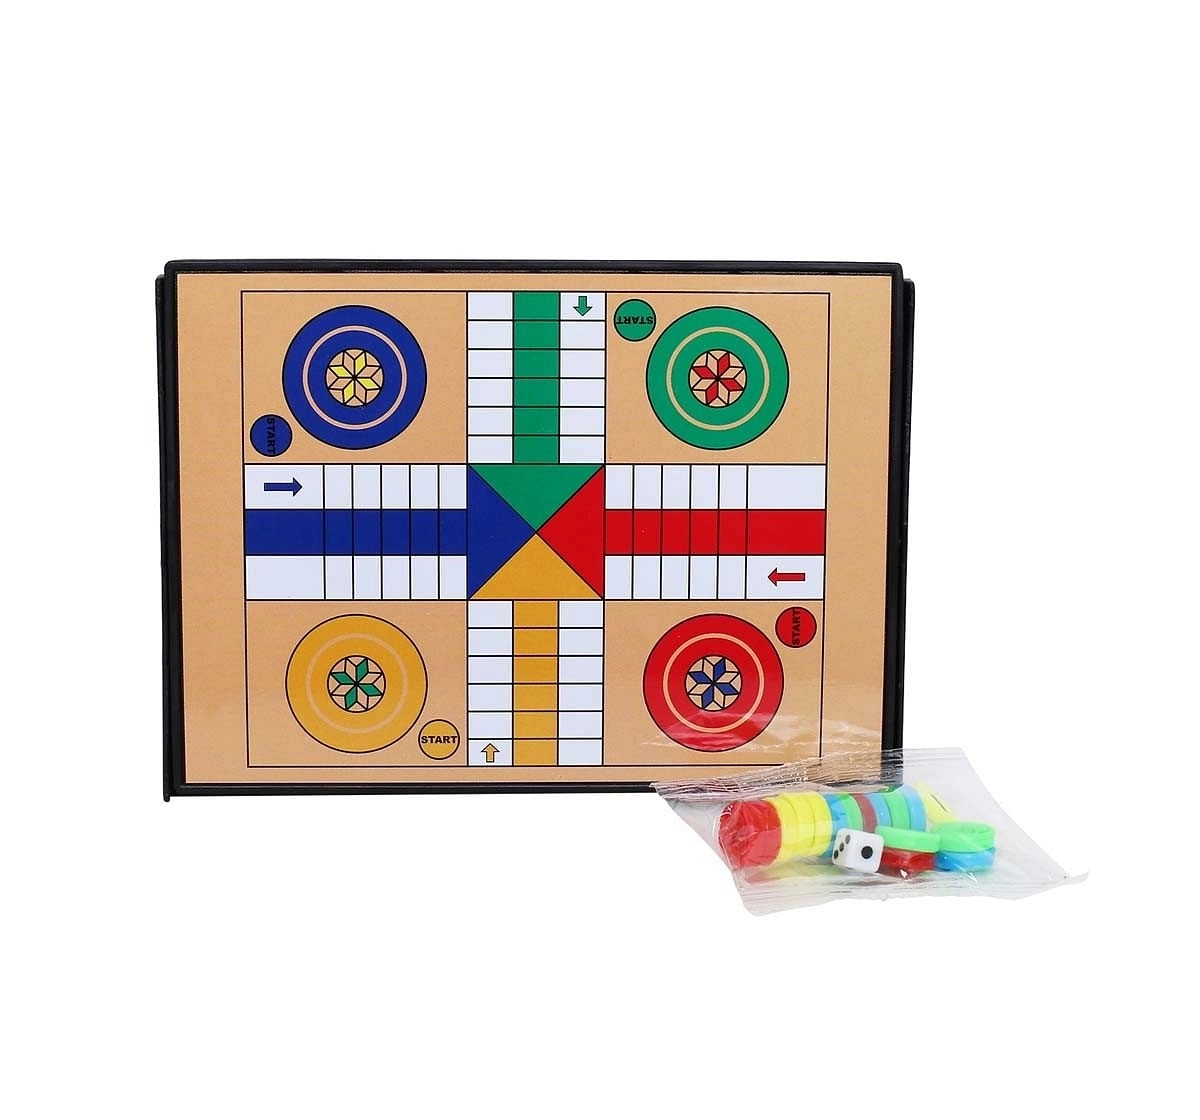 Comdaq 5 In 1 Magnetic Board Game for Kids age 3Y+ 